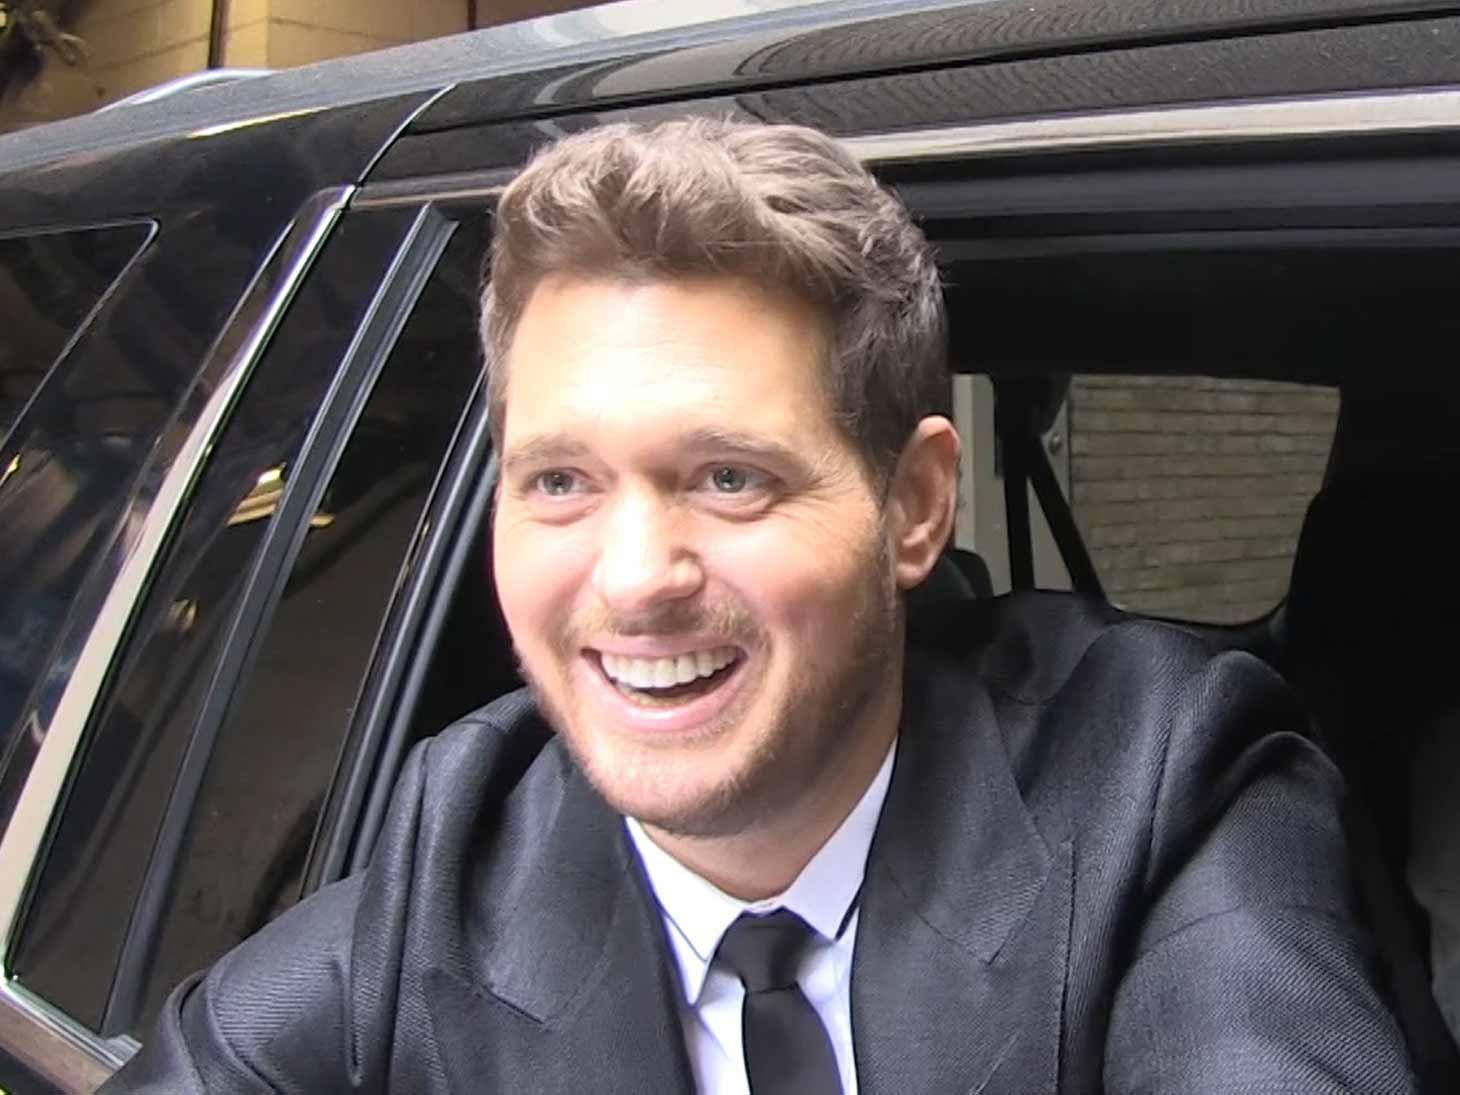 Michael Bublé Spreads Holiday Cheer, Even When Covered In Baby Puke